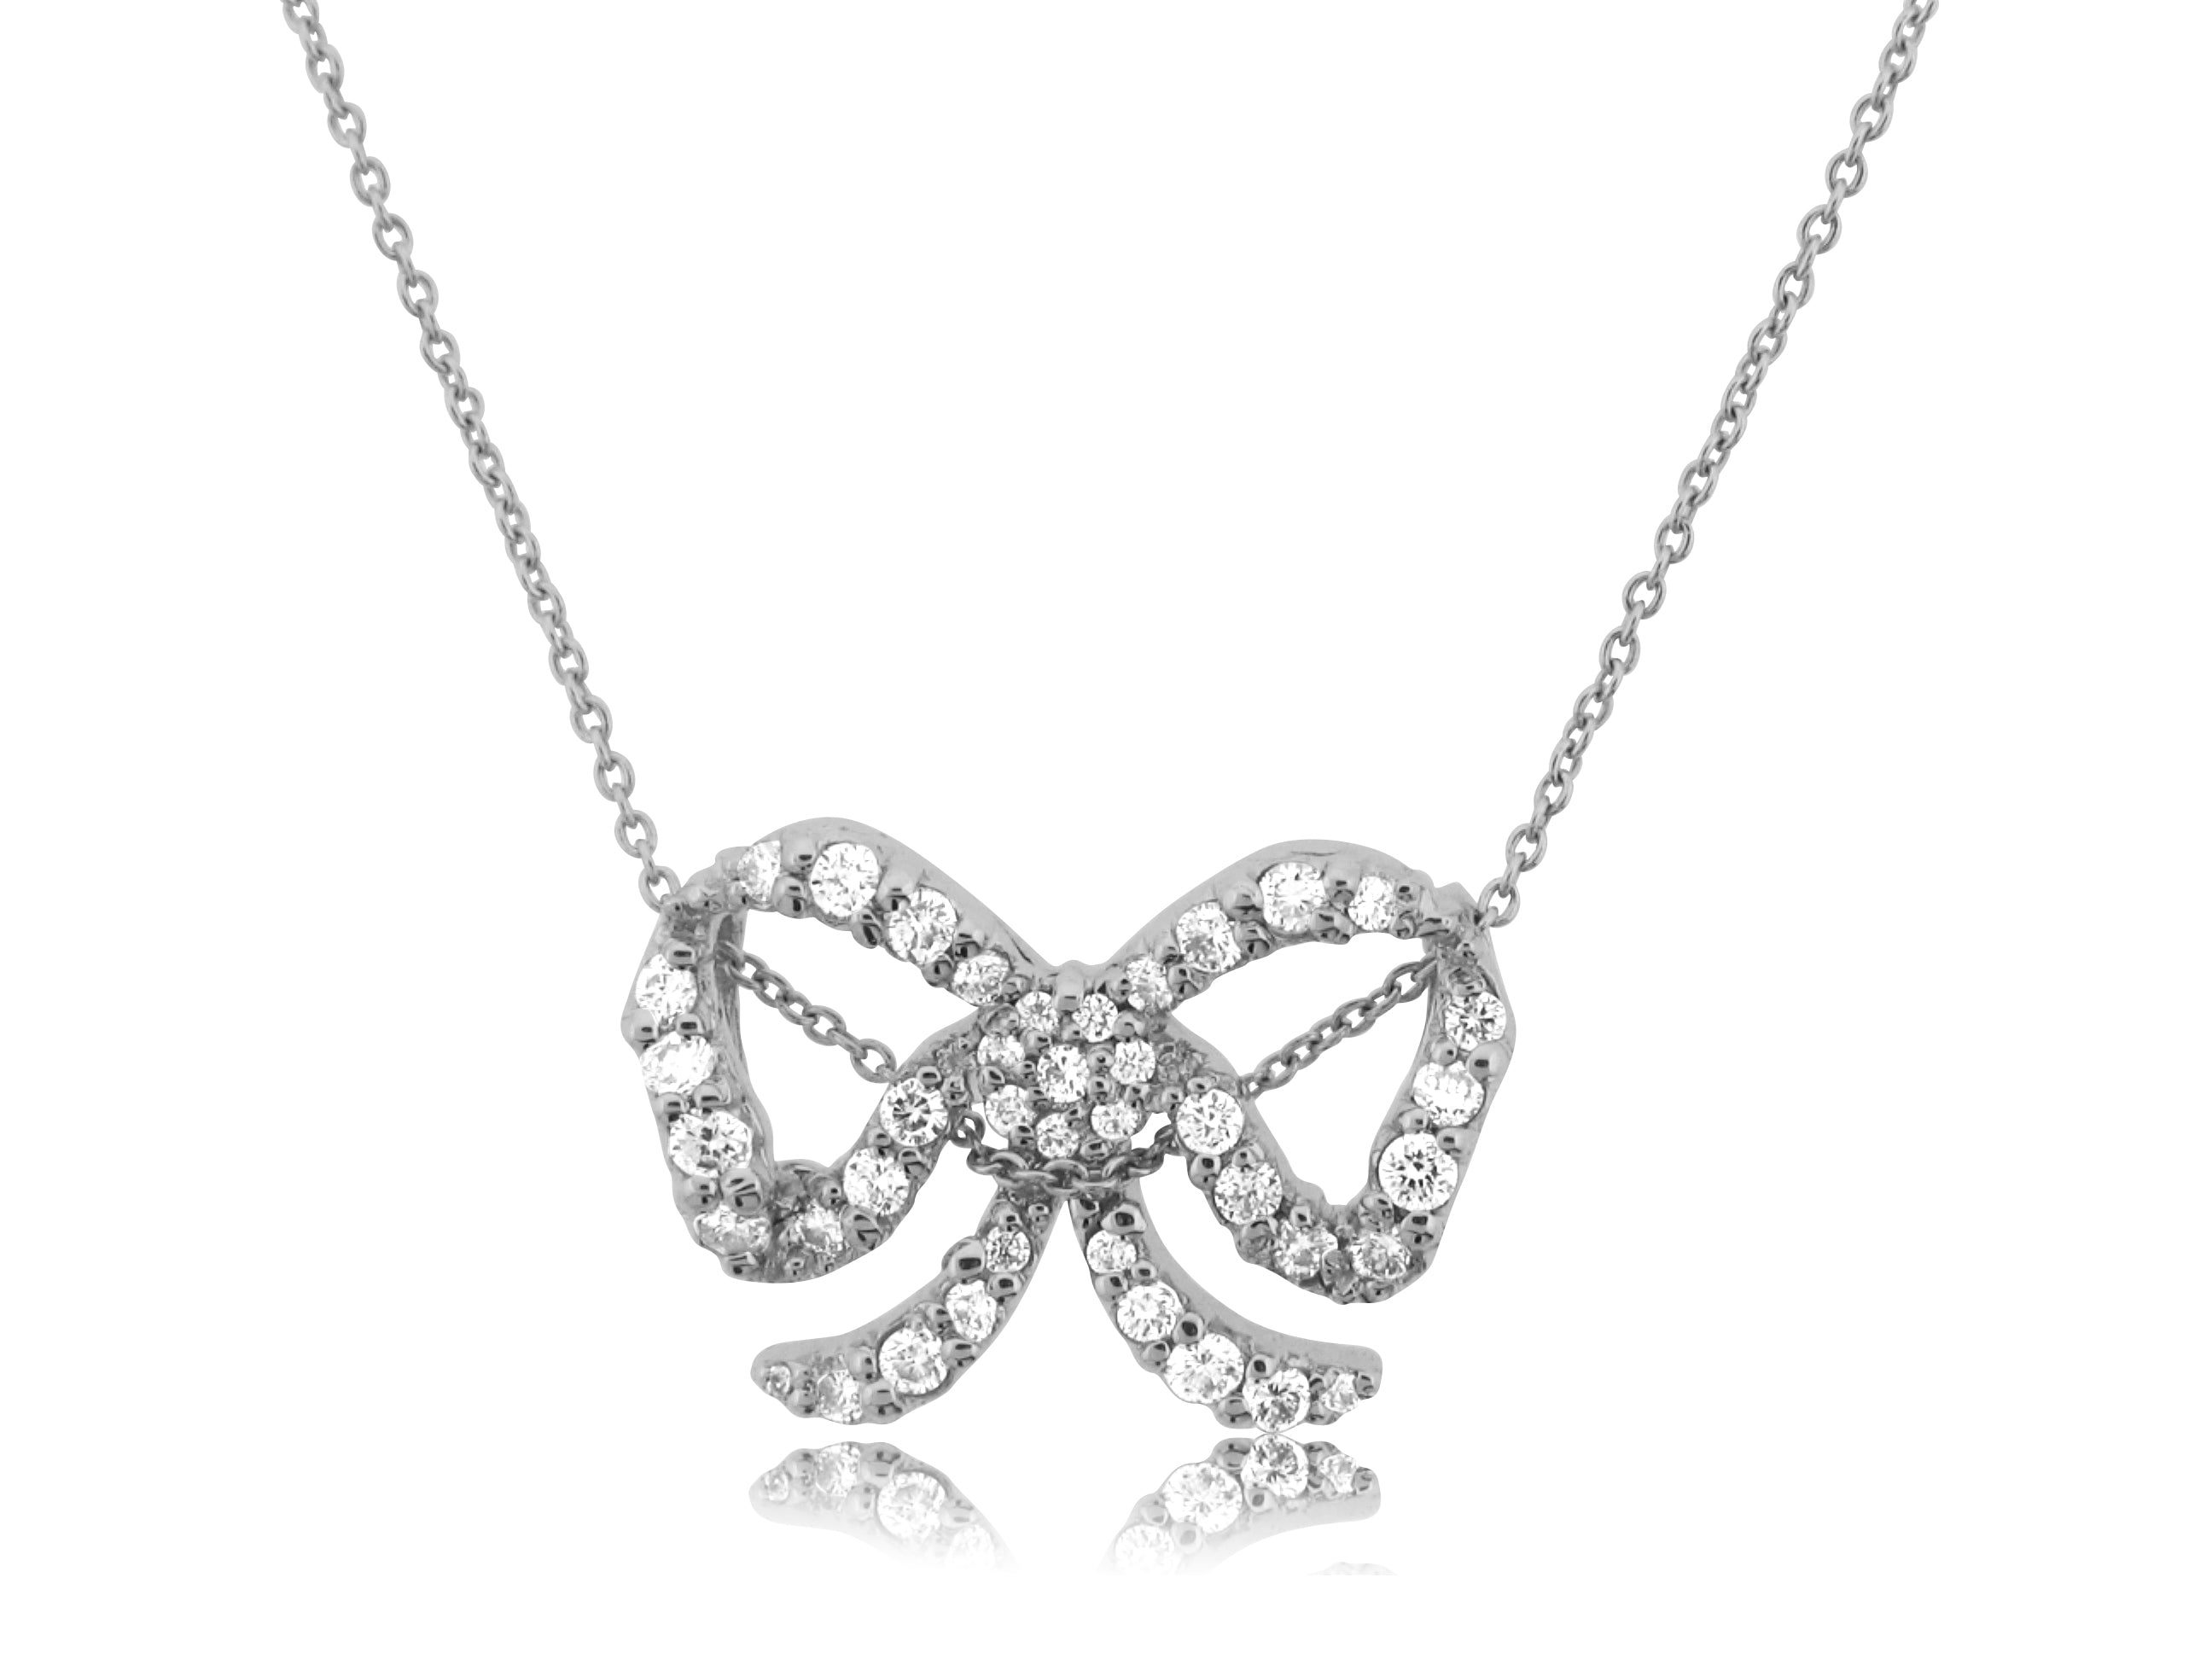 ROBERTO COIN 18K WHITE GOLD 0.49CT SI/G DIAMOND BOW NECKLACE FROM THE TINY TREASURES COLLECTION